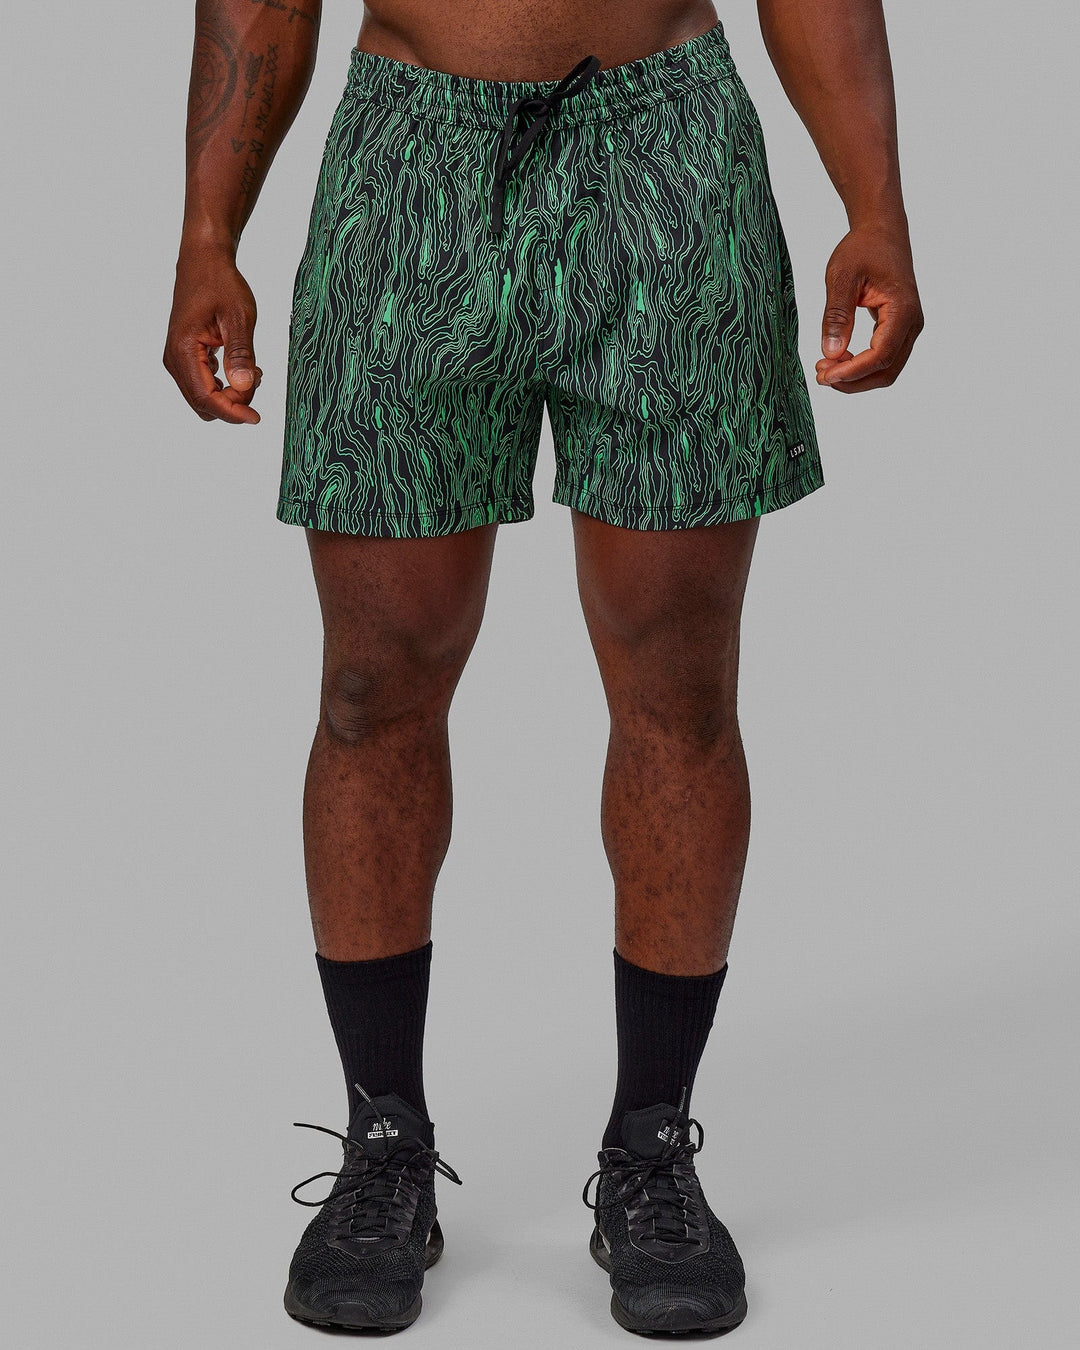 Rep 5" Performance Shorts - Topographic Black-Lime